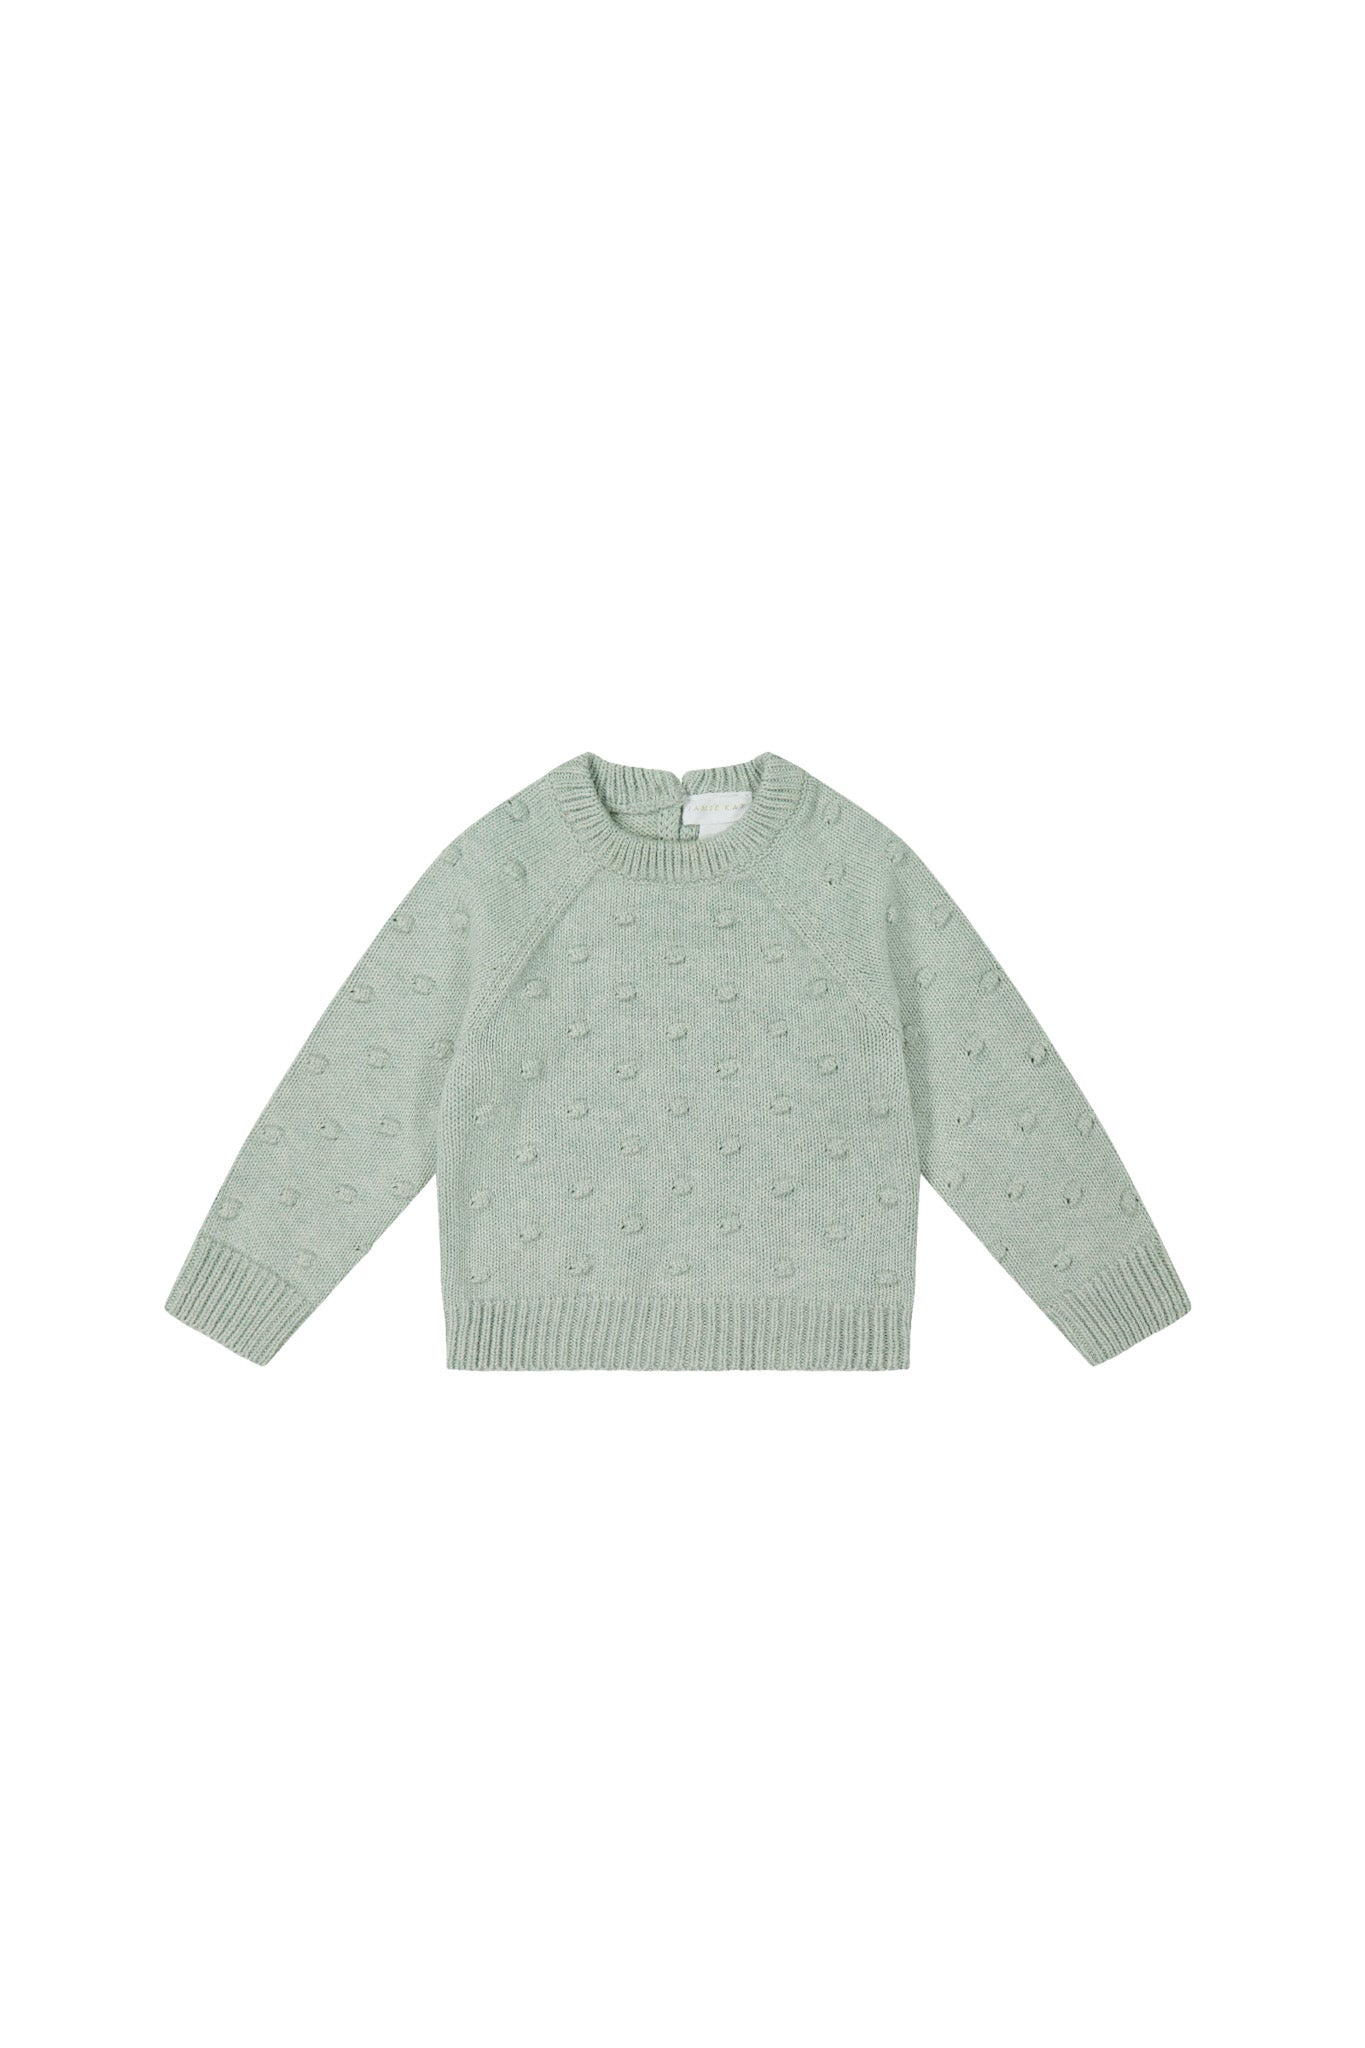 Dotty Knit Jumper - Ocean Spray Marle-Clothing & Accessories-Jamie Kay-The Bay Room